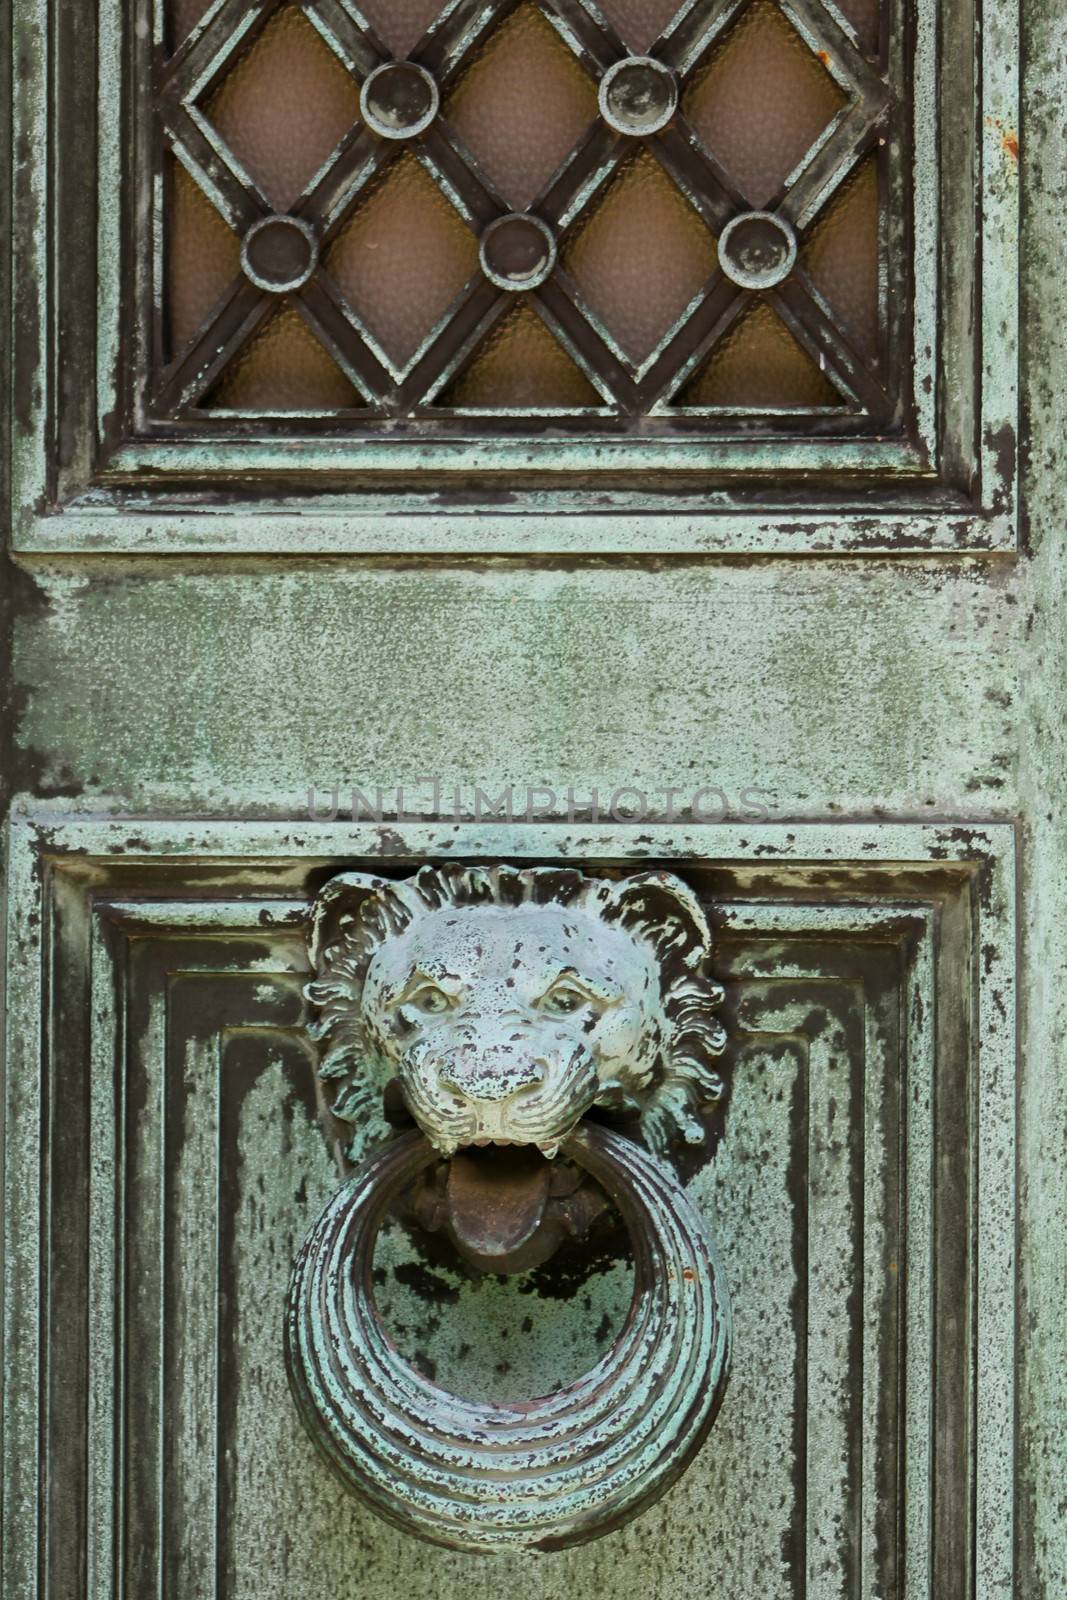 Close-up of a metal mausoleum door, weathered to a green patina, featuring a lion head doorknocker and frosted glass window.